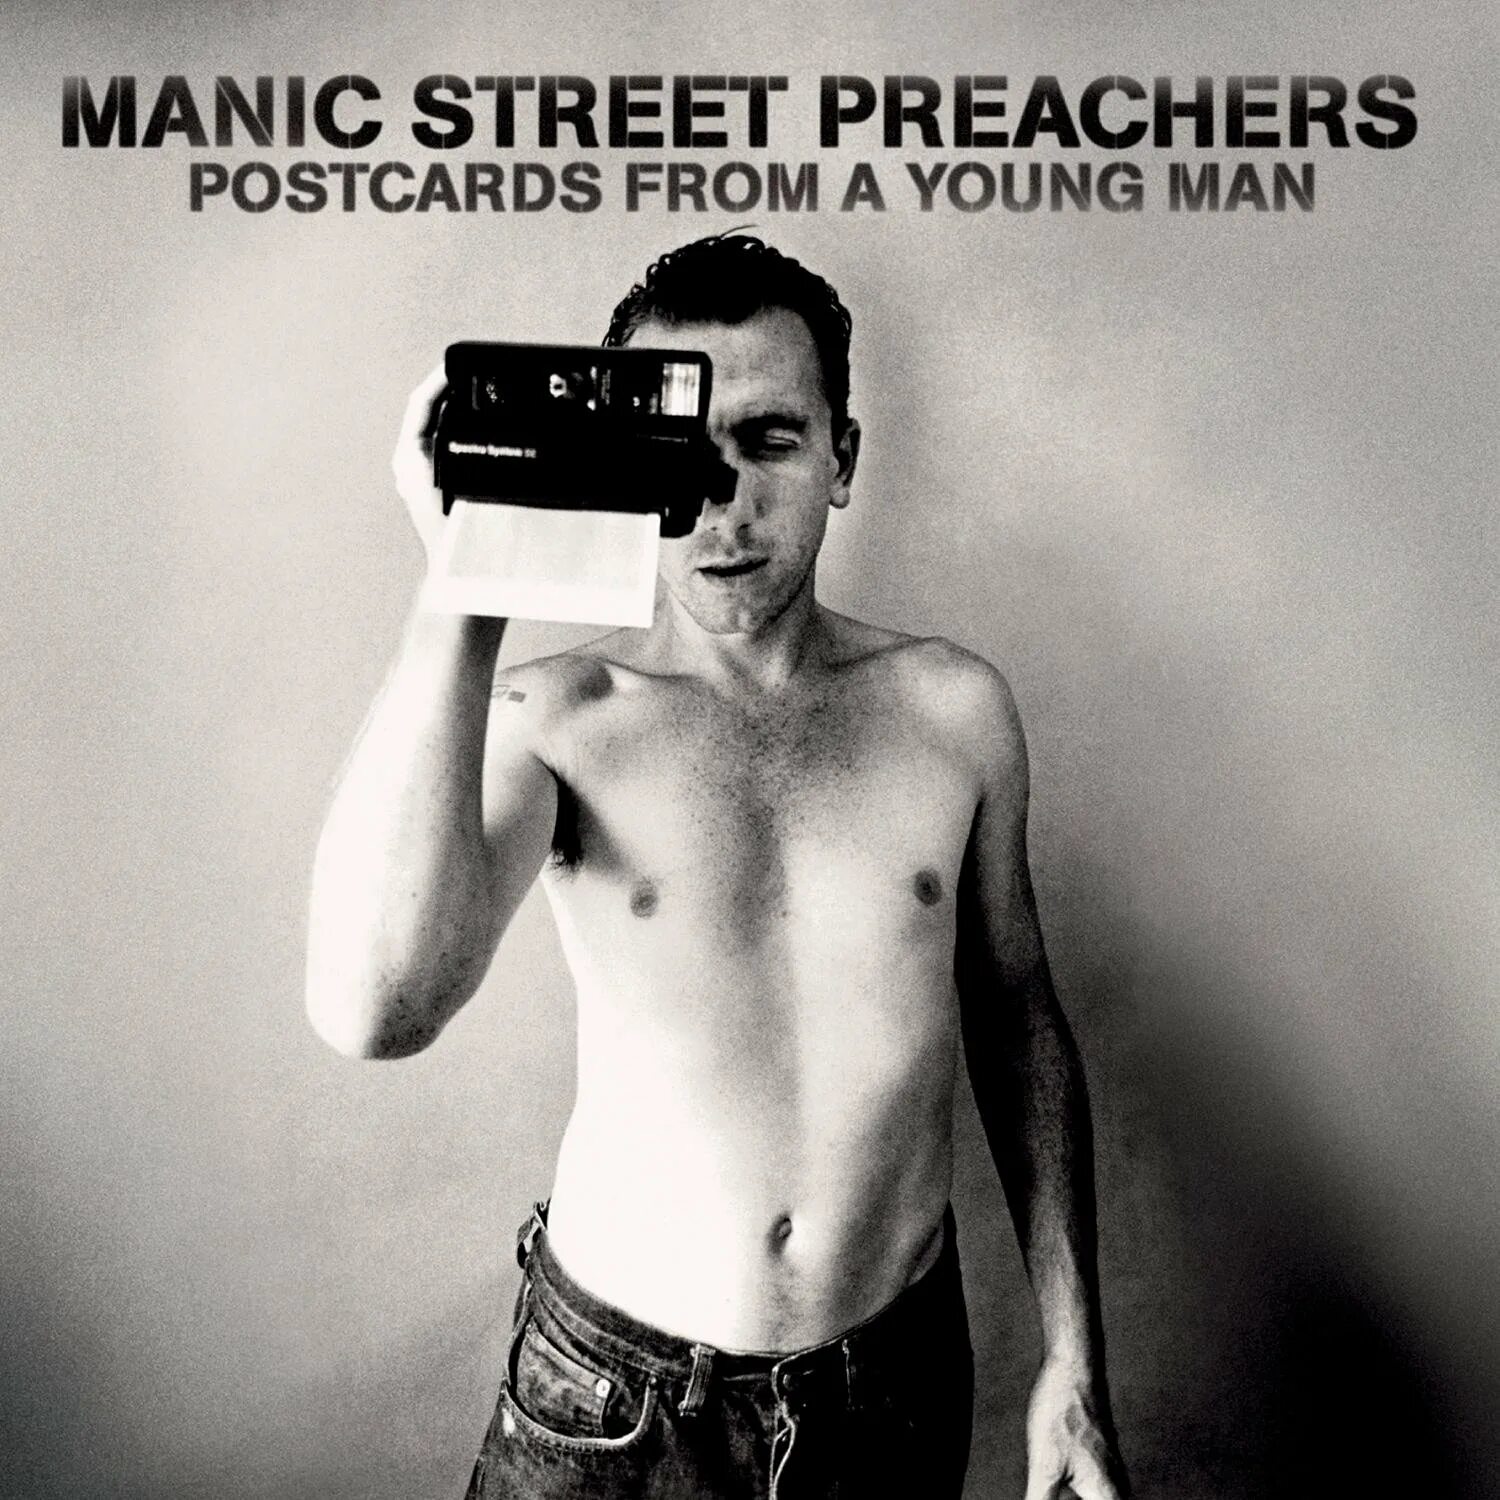 This man is young. Manic Street Preachers. Postcards from a young man. Manic Street Preachers альбомы. Manic Street Preachers Generation terrorists.